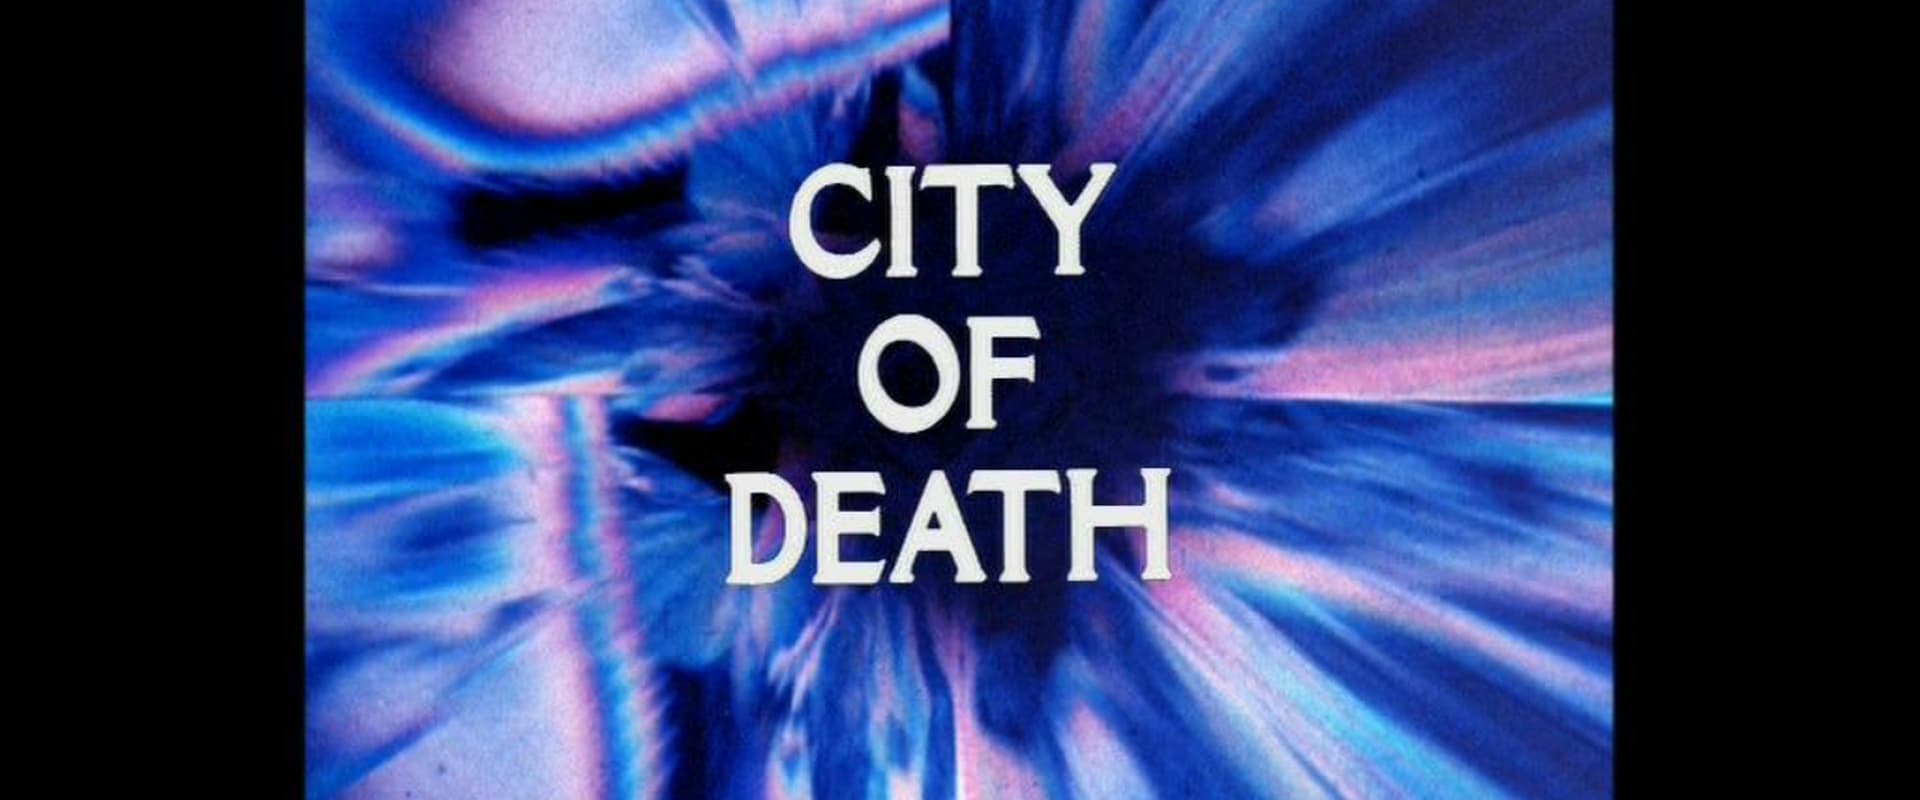 Doctor Who: City of Death